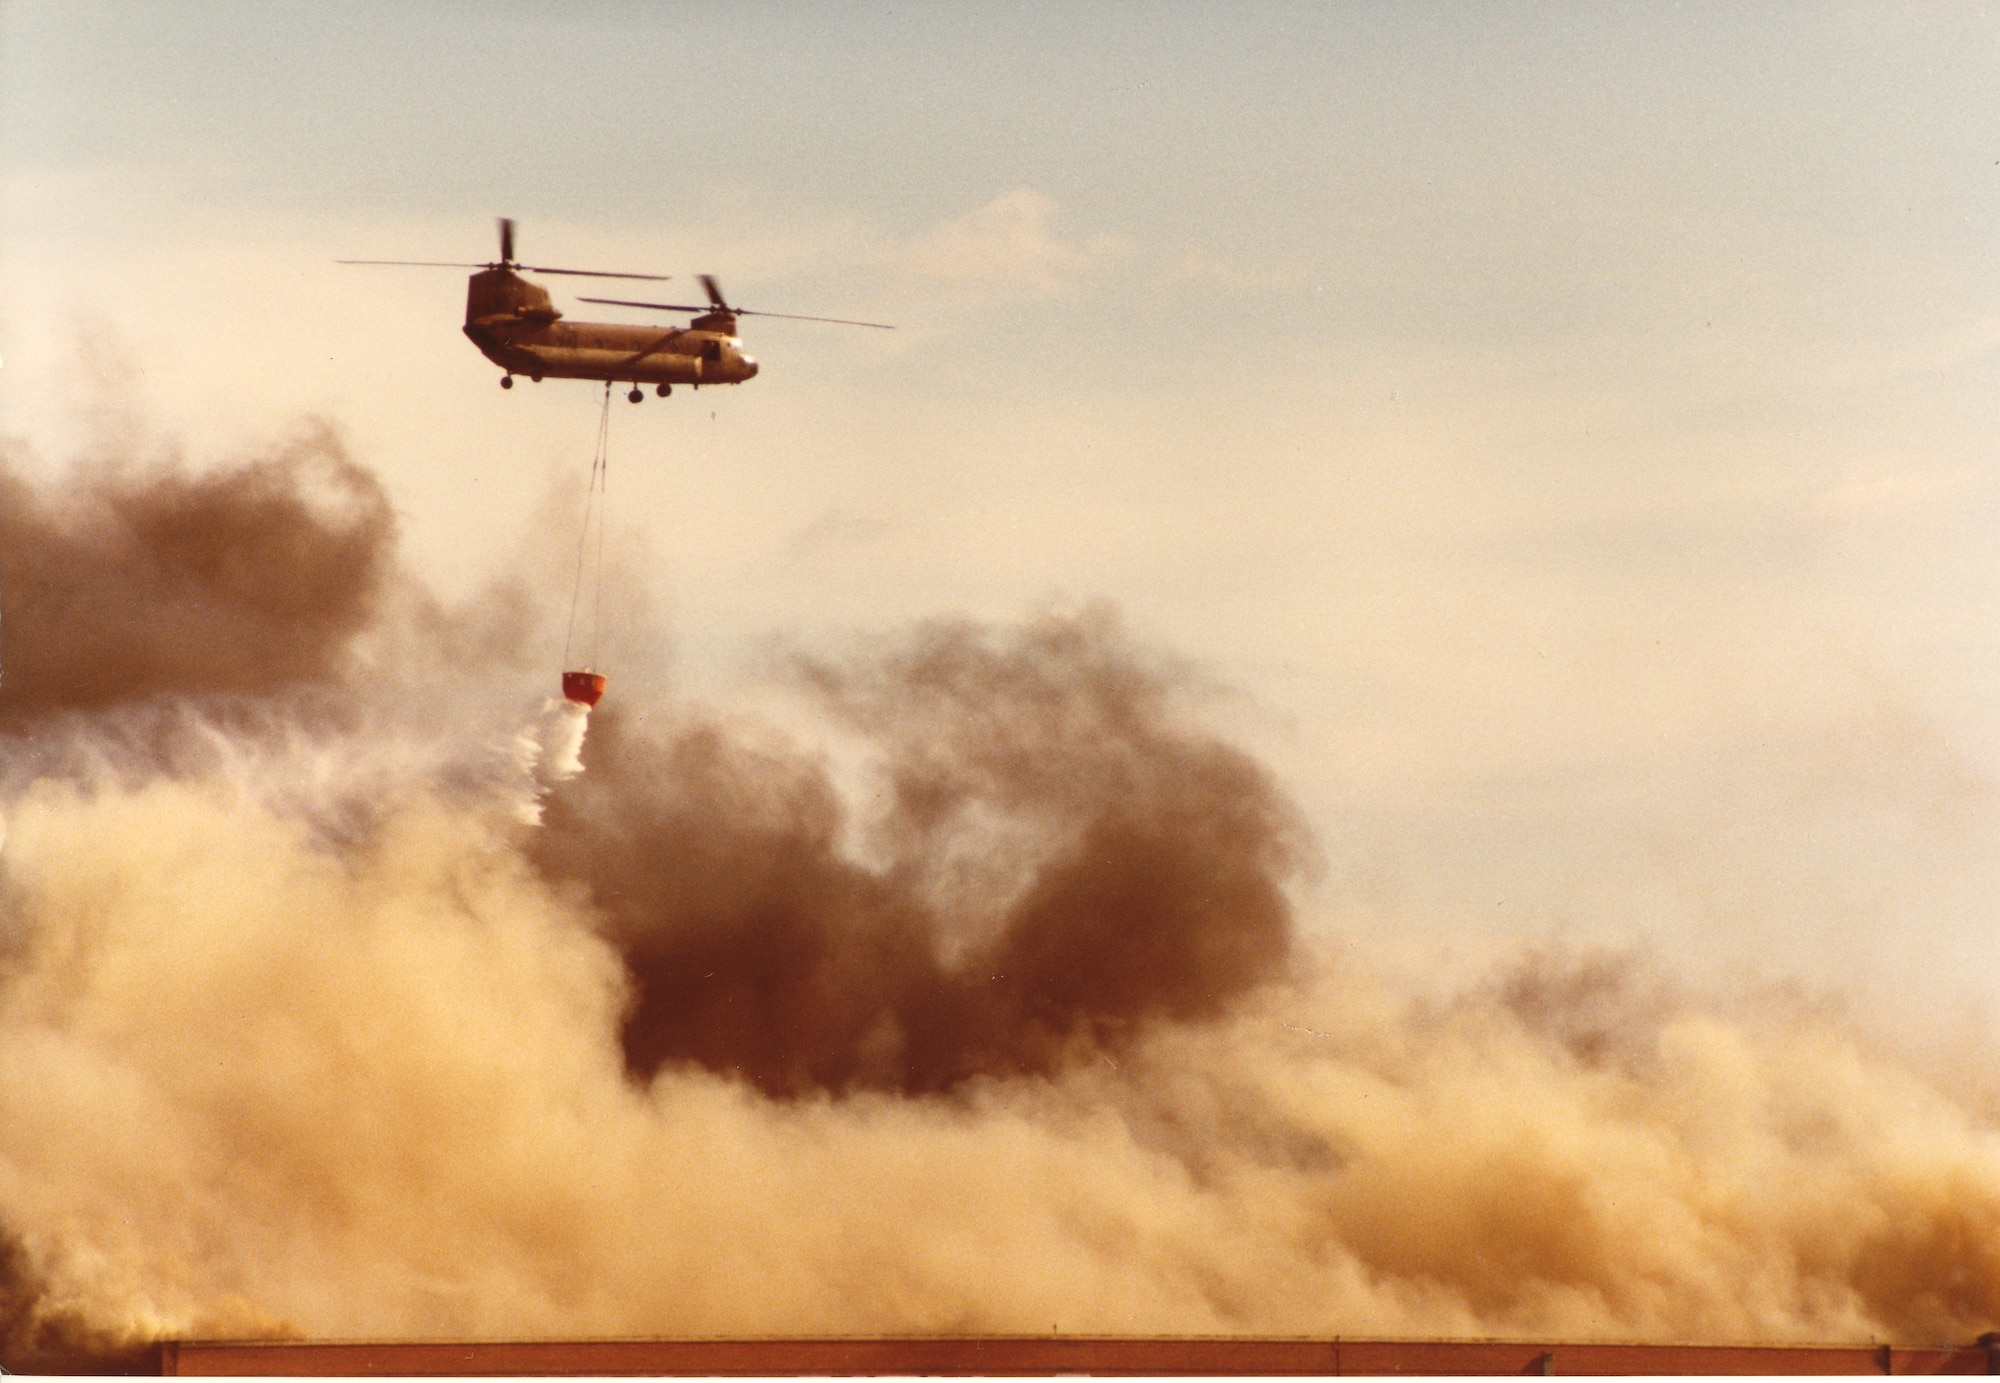 Helicopter dumping water on smoky Bld 3001 roof-1984 Fire